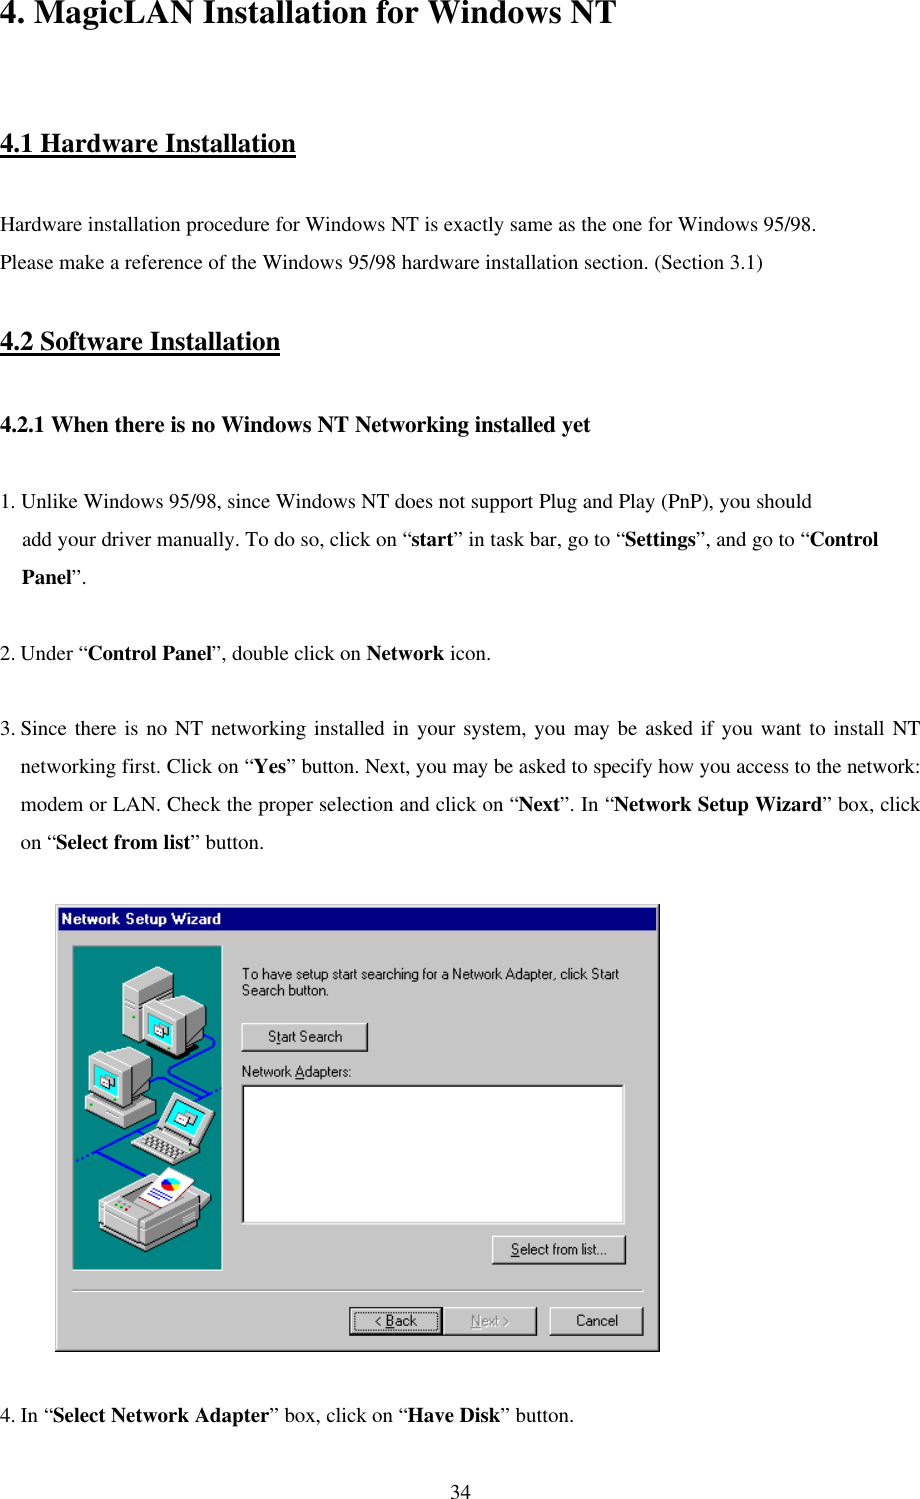 344. MagicLAN Installation for Windows NT4.1 Hardware InstallationHardware installation procedure for Windows NT is exactly same as the one for Windows 95/98.Please make a reference of the Windows 95/98 hardware installation section. (Section 3.1)4.2 Software Installation4.2.1 When there is no Windows NT Networking installed yet1. Unlike Windows 95/98, since Windows NT does not support Plug and Play (PnP), you should    add your driver manually. To do so, click on “start” in task bar, go to “Settings”, and go to “Control    Panel”.2. Under “Control Panel”, double click on Network icon.3. Since there is no NT networking installed in your system, you may be asked if you want to install NTnetworking first. Click on “Yes” button. Next, you may be asked to specify how you access to the network:modem or LAN. Check the proper selection and click on “Next”. In “Network Setup Wizard” box, clickon “Select from list” button.          4. In “Select Network Adapter” box, click on “Have Disk” button.